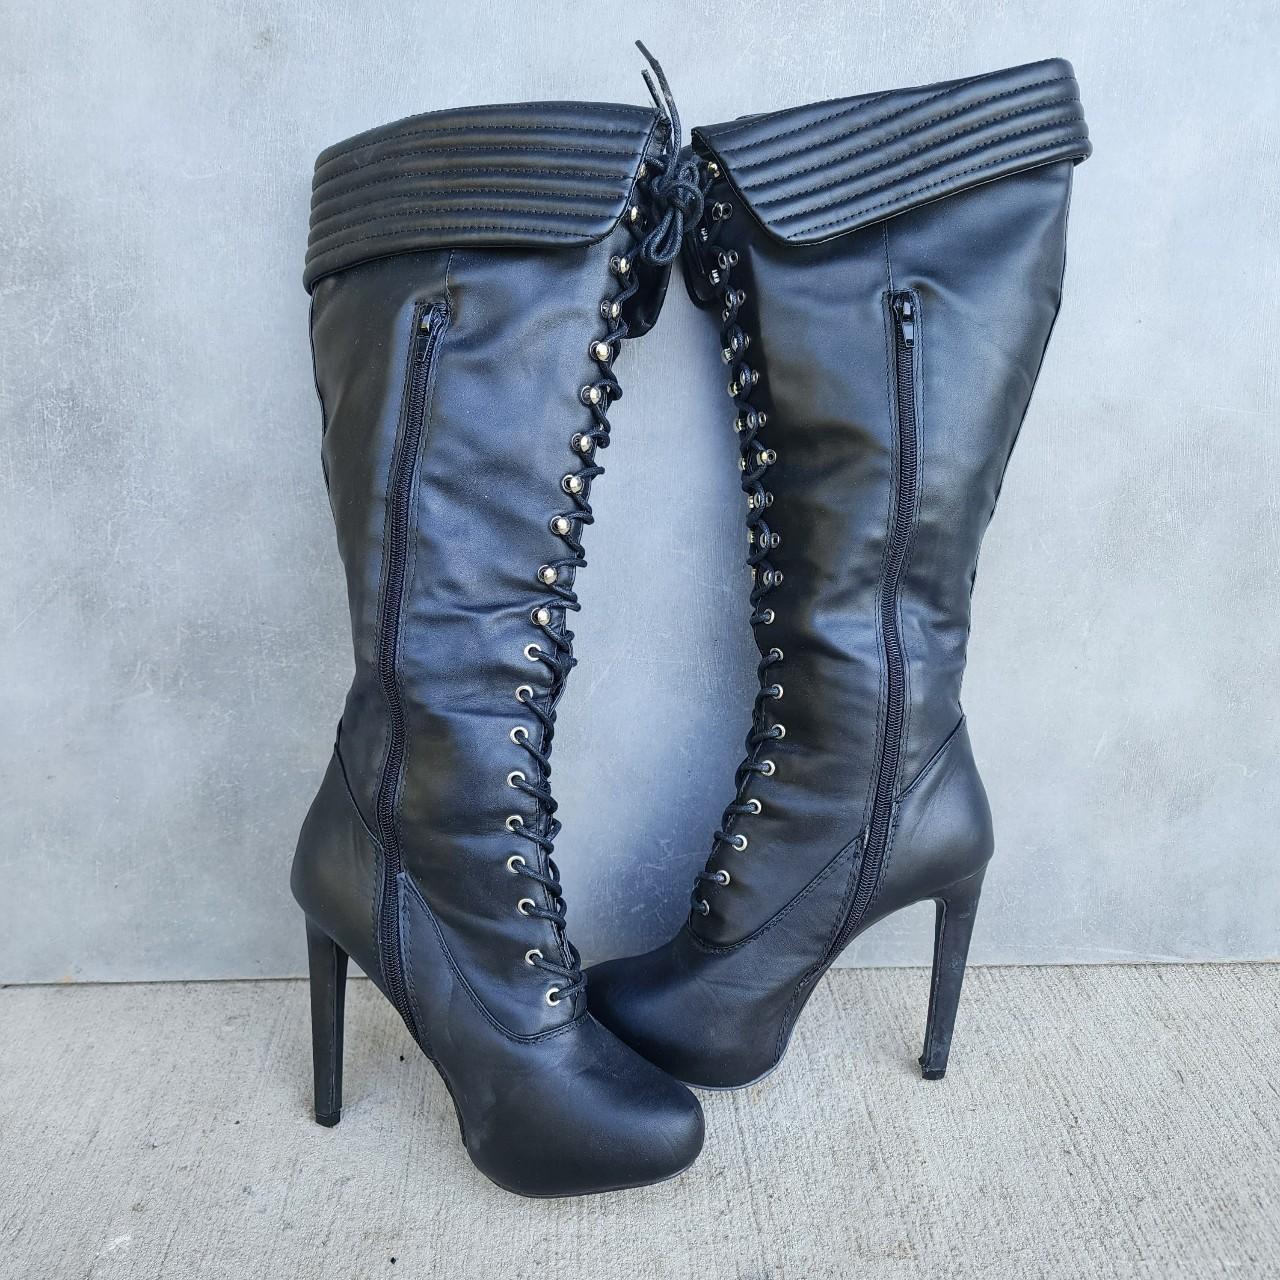 JustFab Women's Black and Silver Boots | Depop